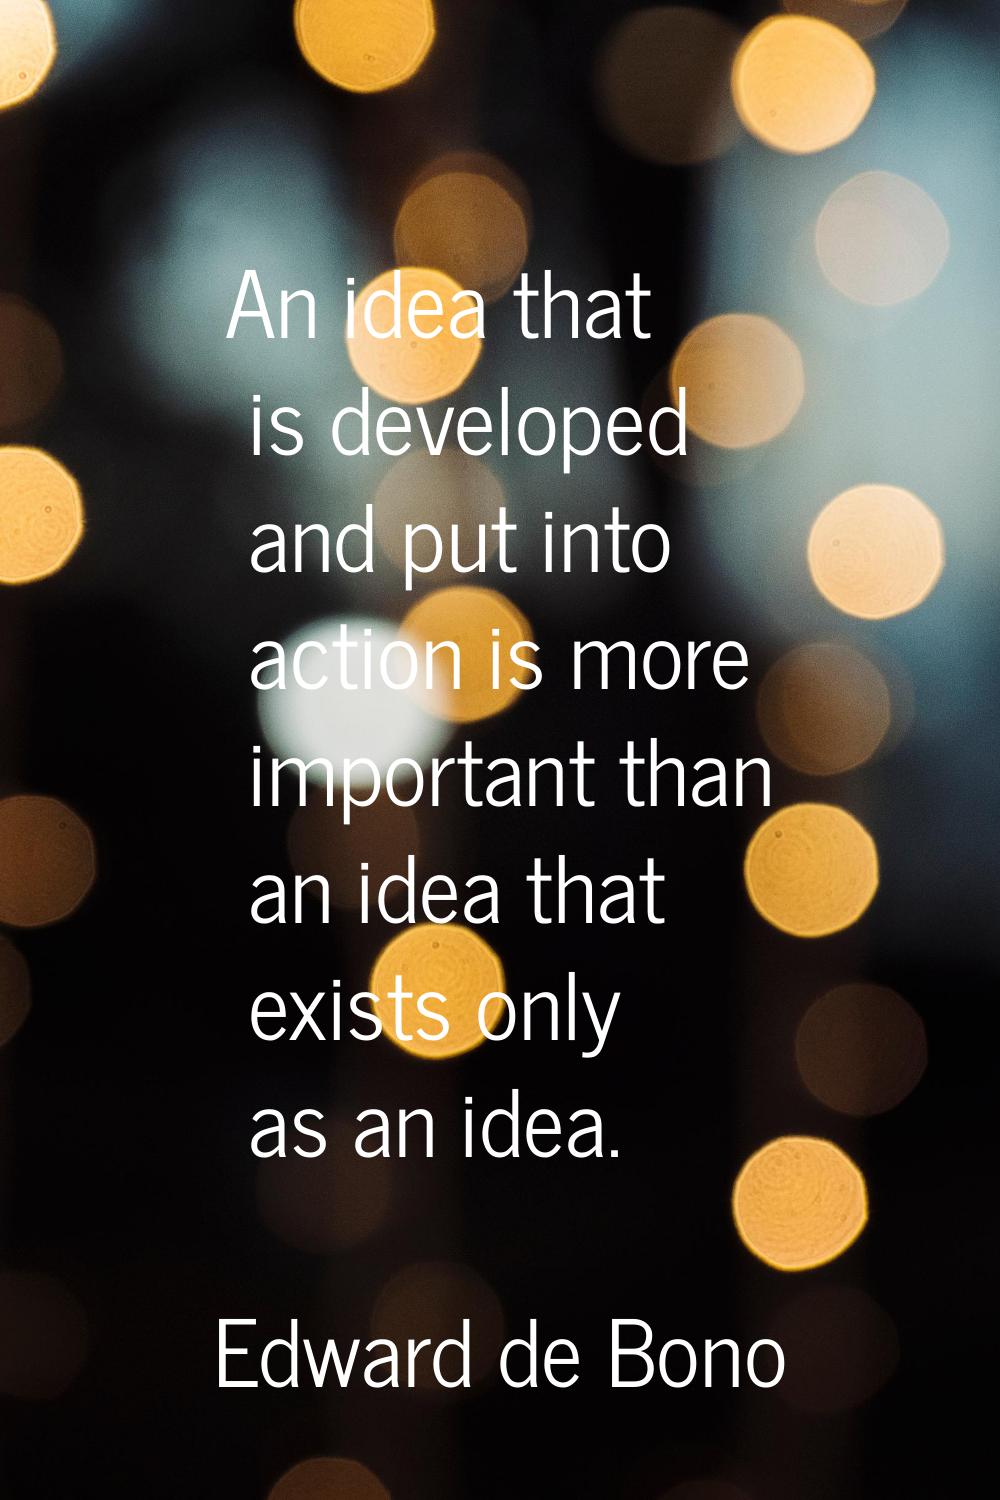 An idea that is developed and put into action is more important than an idea that exists only as an